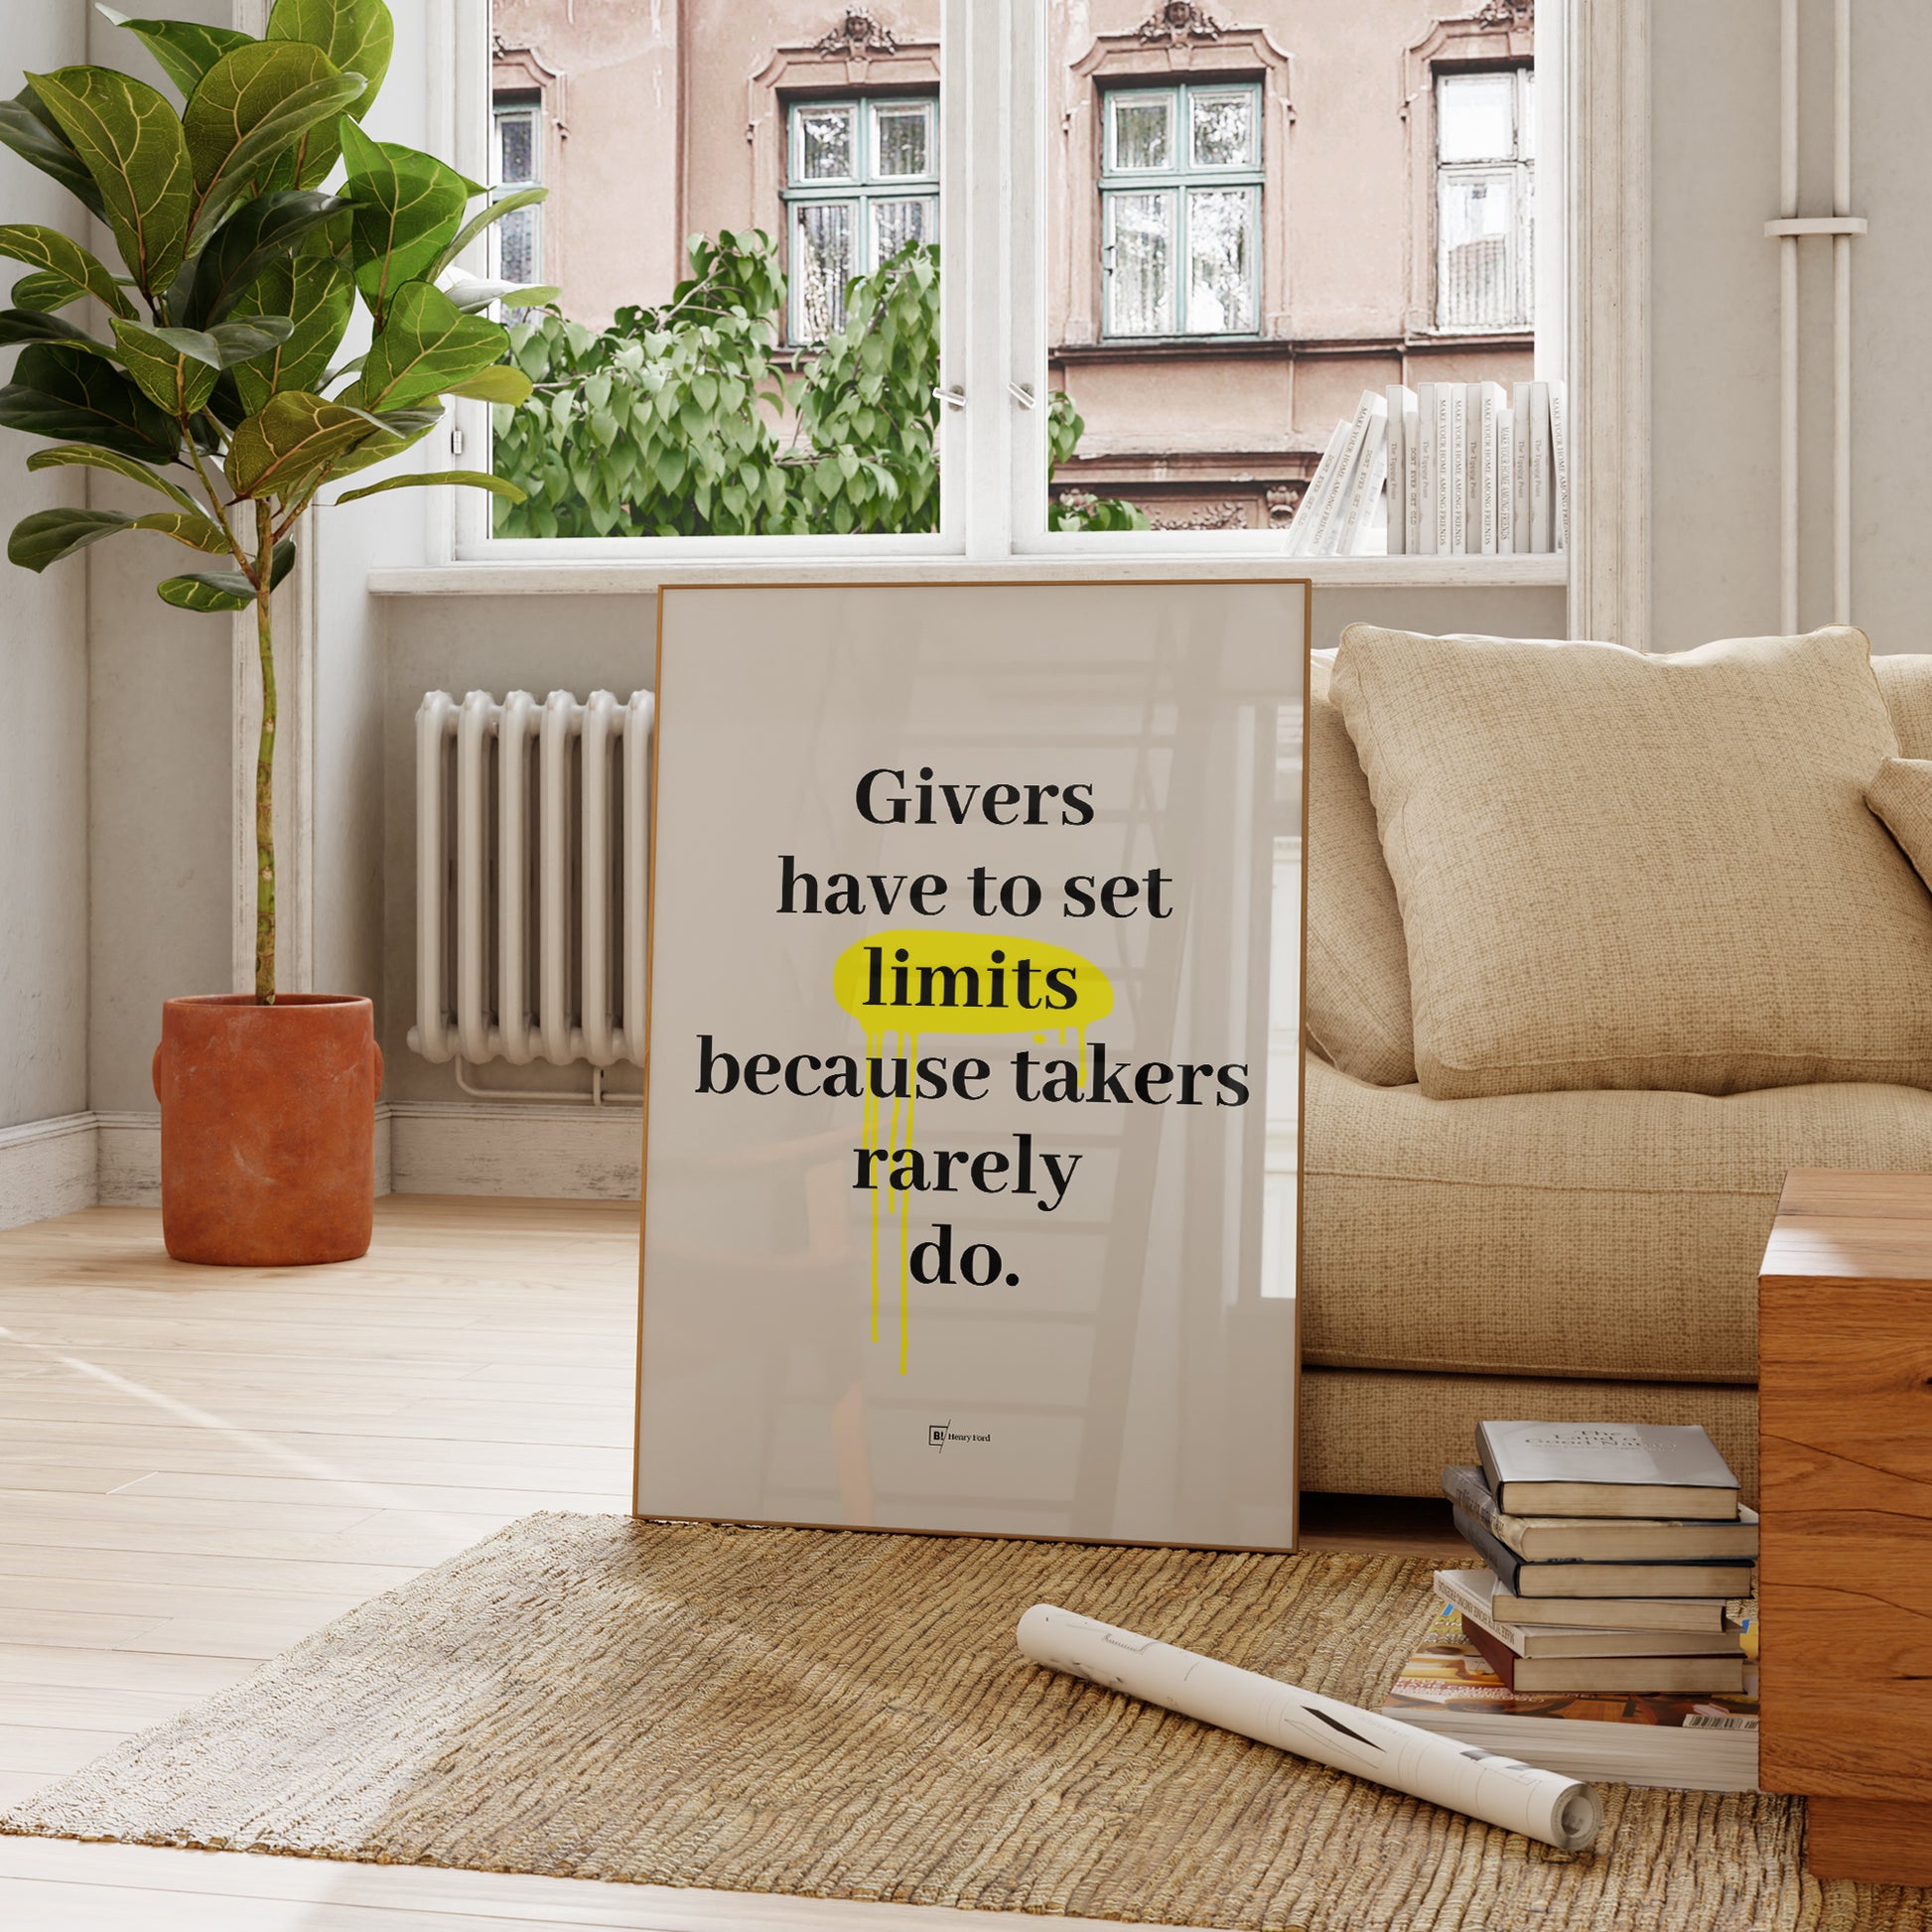 Be inspired by Henry Ford's famous "Givers have to set limits because takers rarely do" quote art print. This artwork was printed using the giclée process on archival acid-free paper and is presented in a french living room that captures its timeless beauty in every detail.